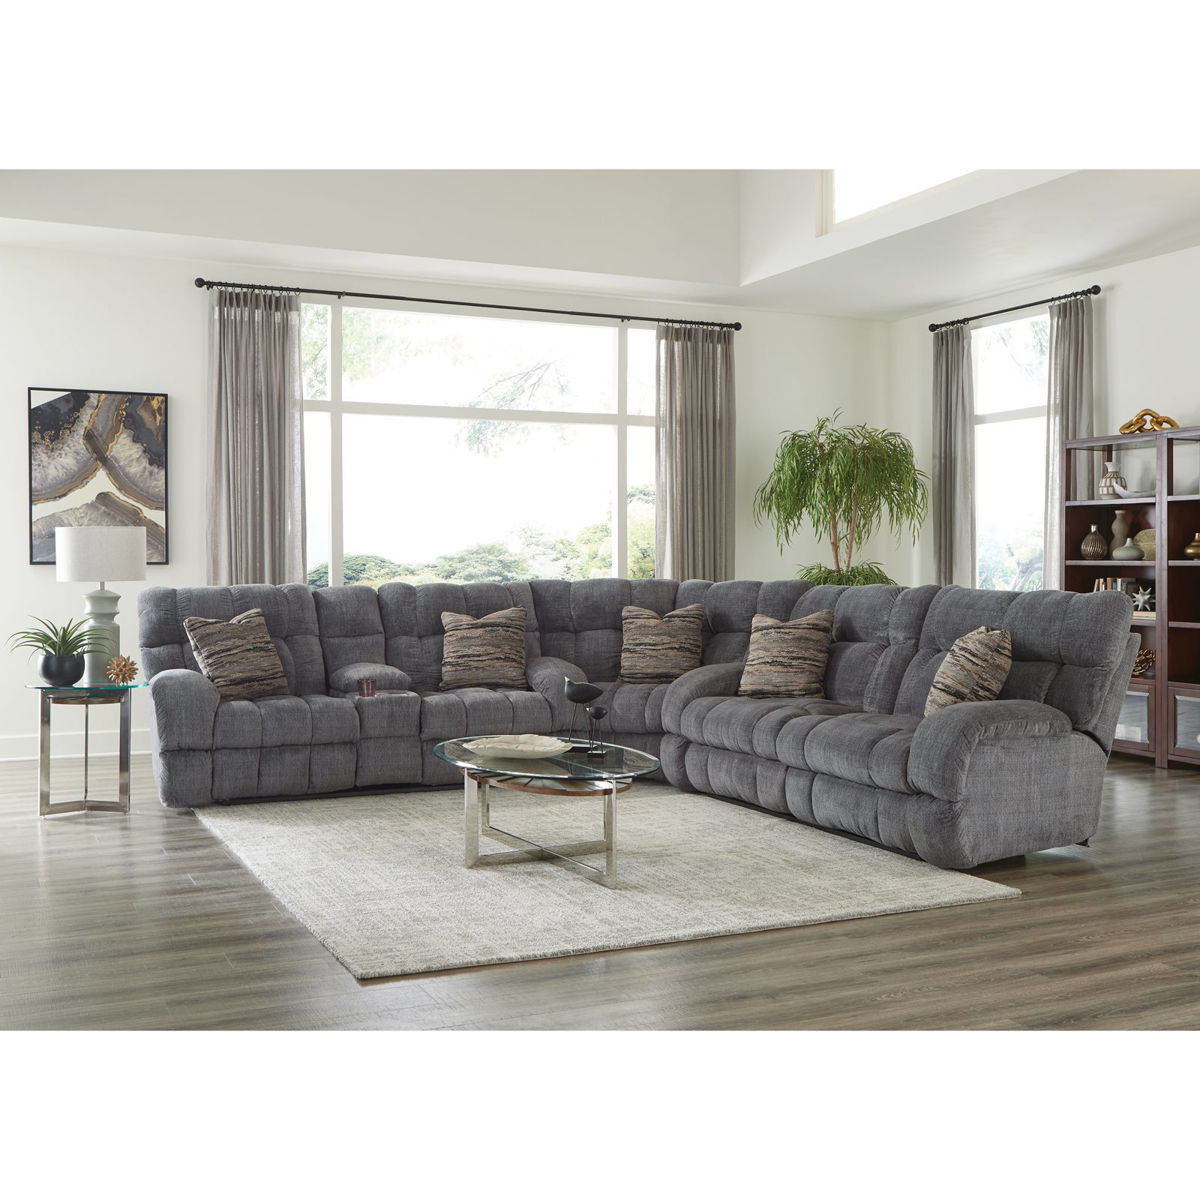 Picture of Ashland Granite 3-Piece Recliner Sectional